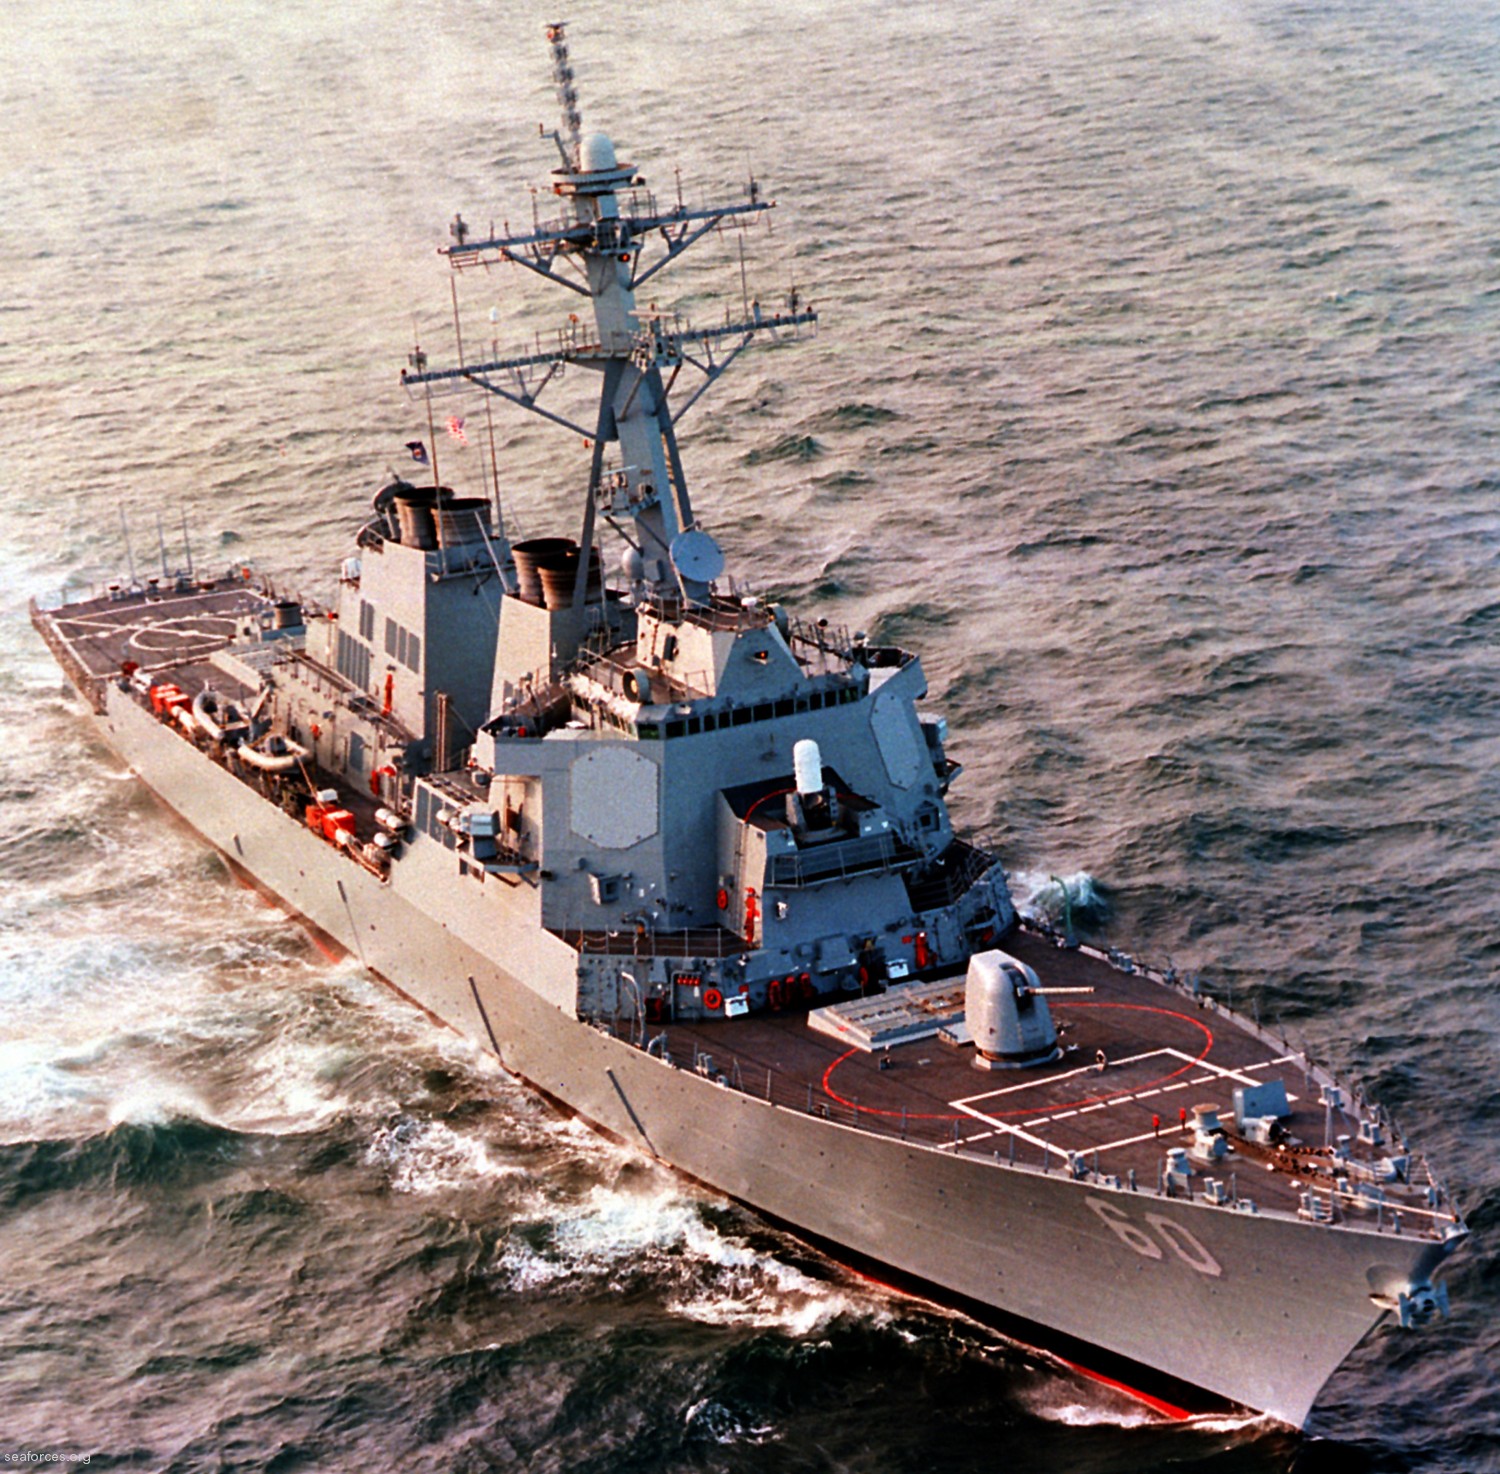 ddg-60 uss paul hamilton guided missile destroyer us navy 62